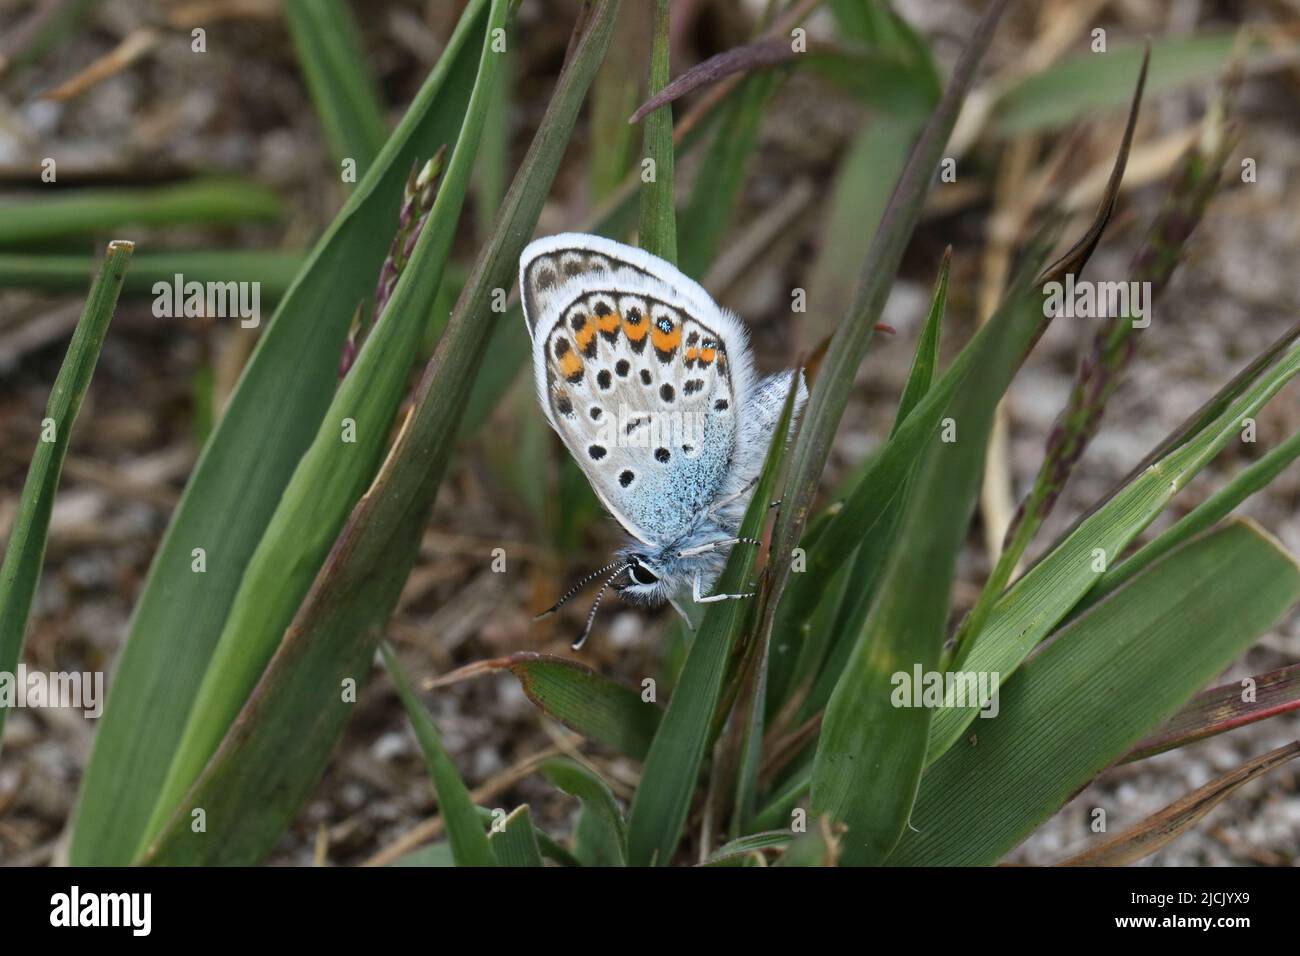 A newly emerged Silver-studded Blue Butterfly, Plebejus argus, resting on a blade of grass in moorland. Stock Photo